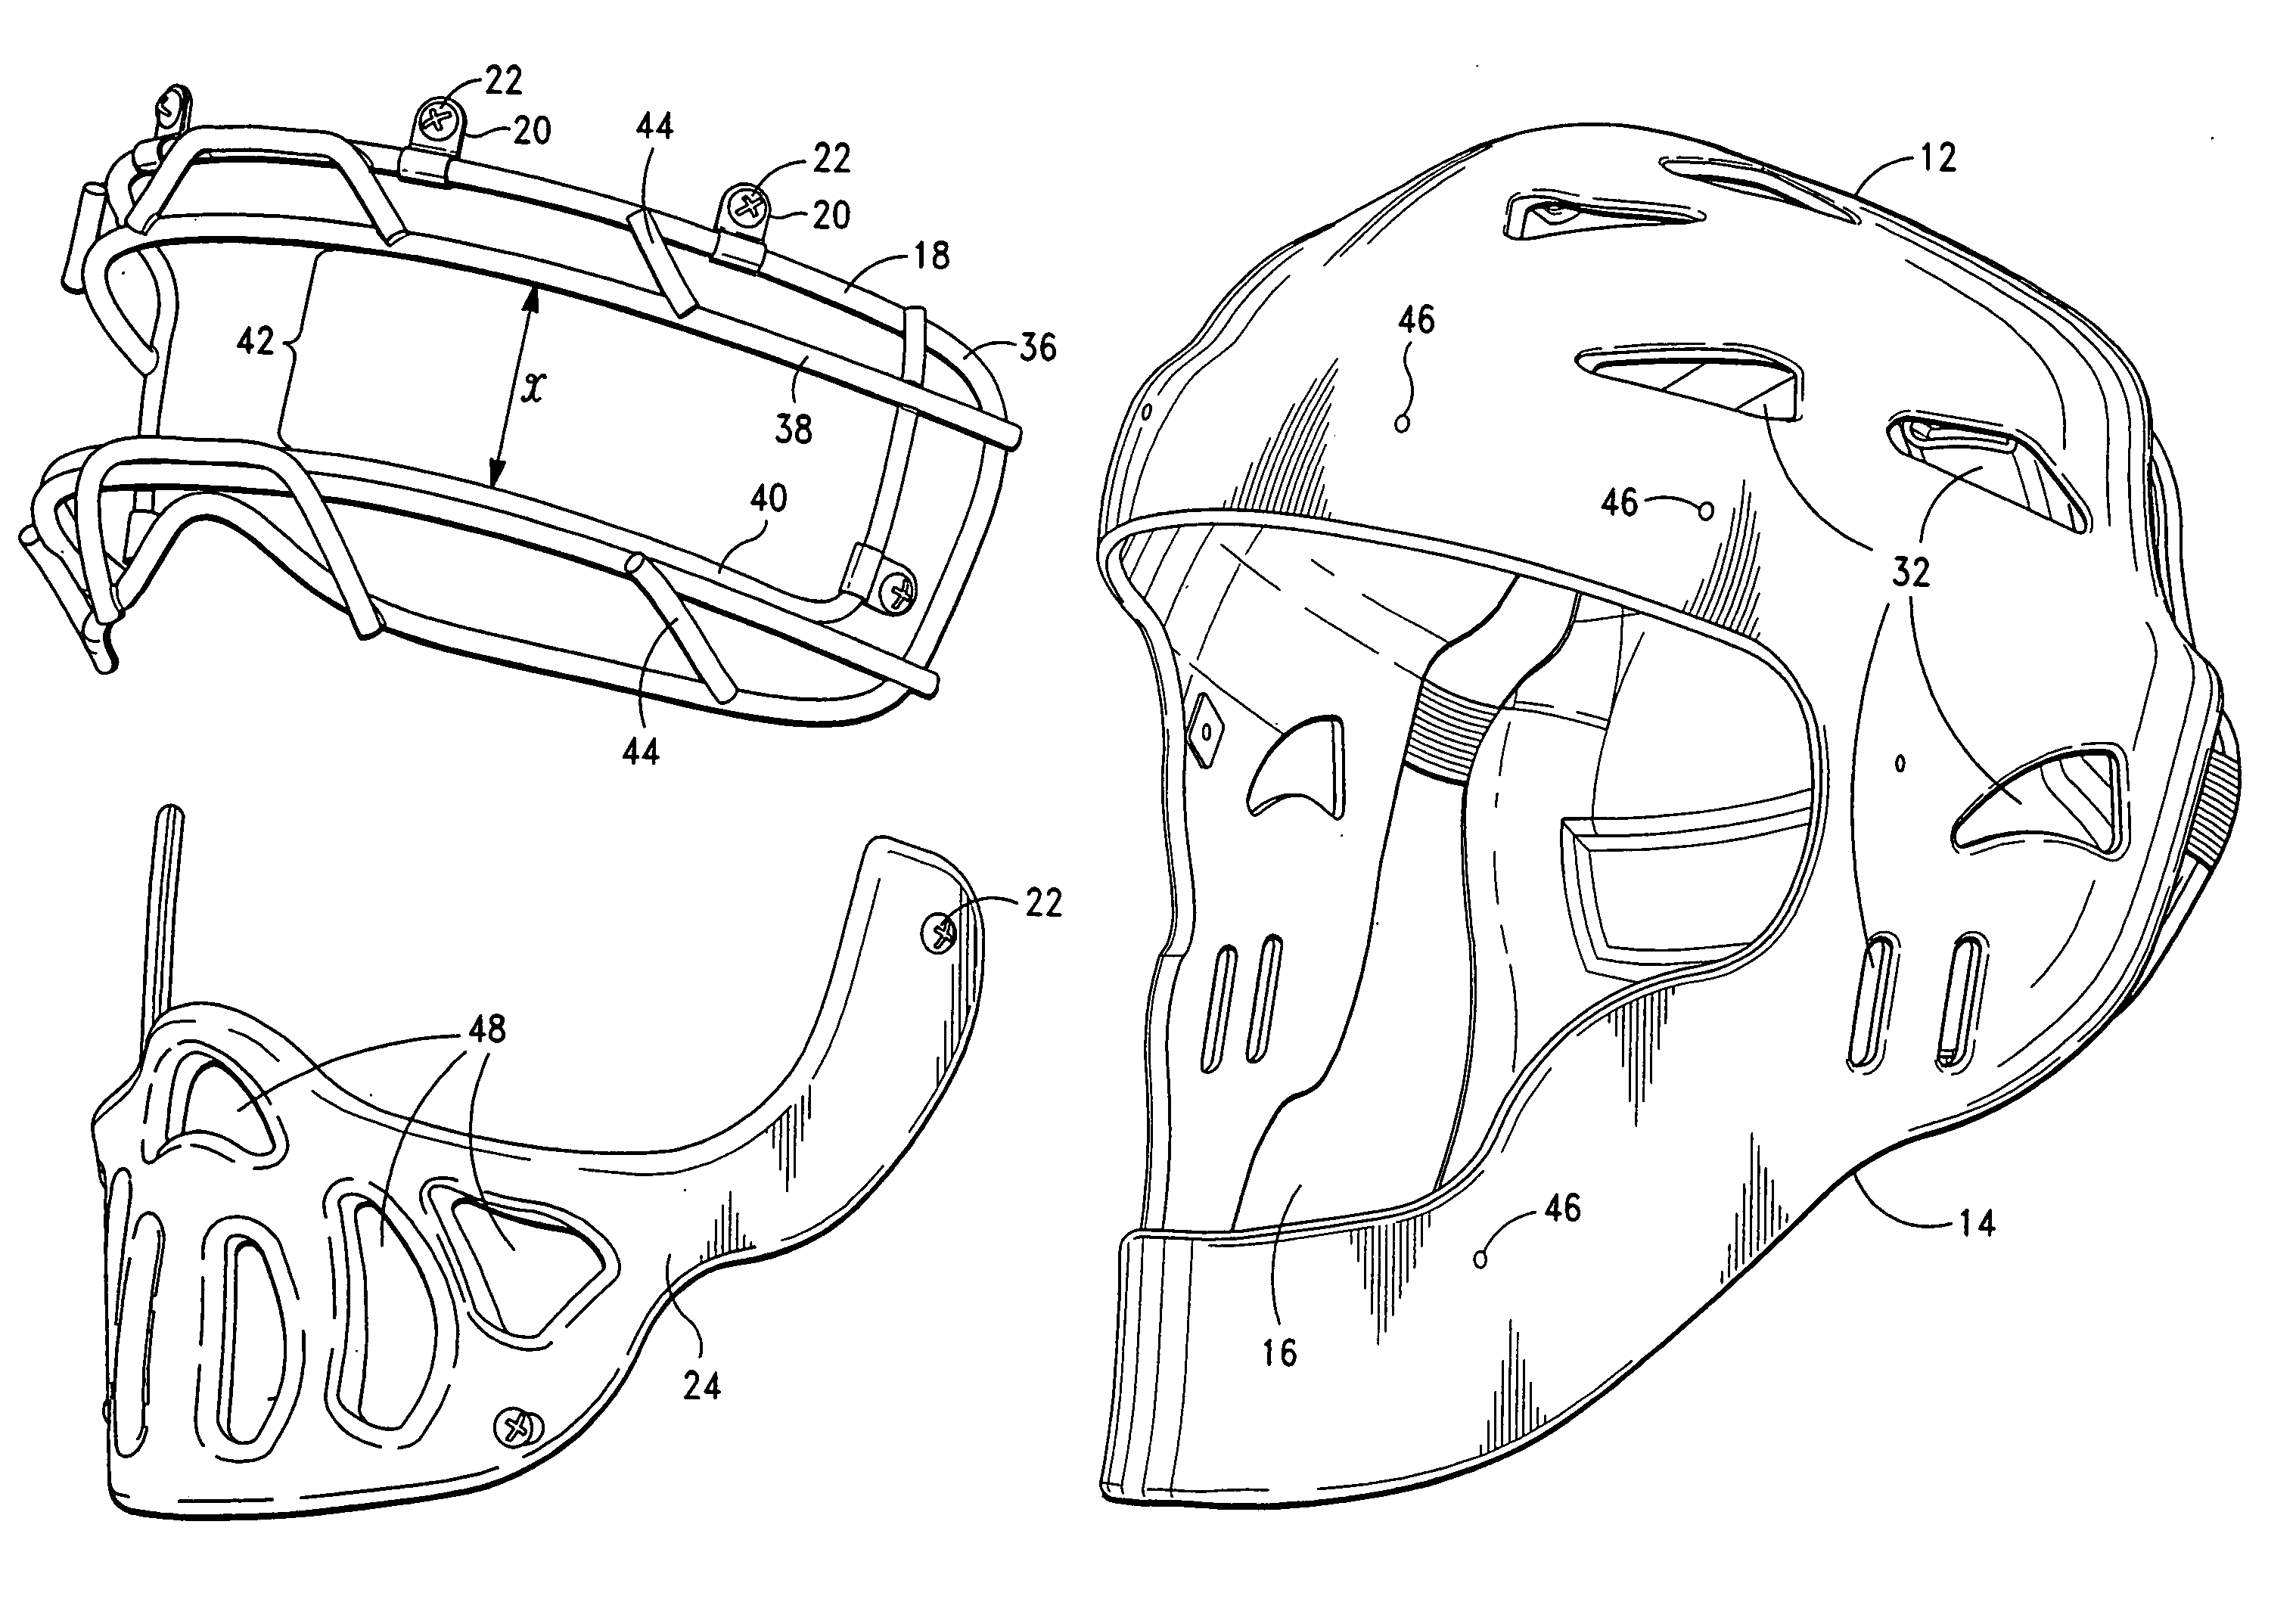 Protective sports helmet having a two-piece face cage